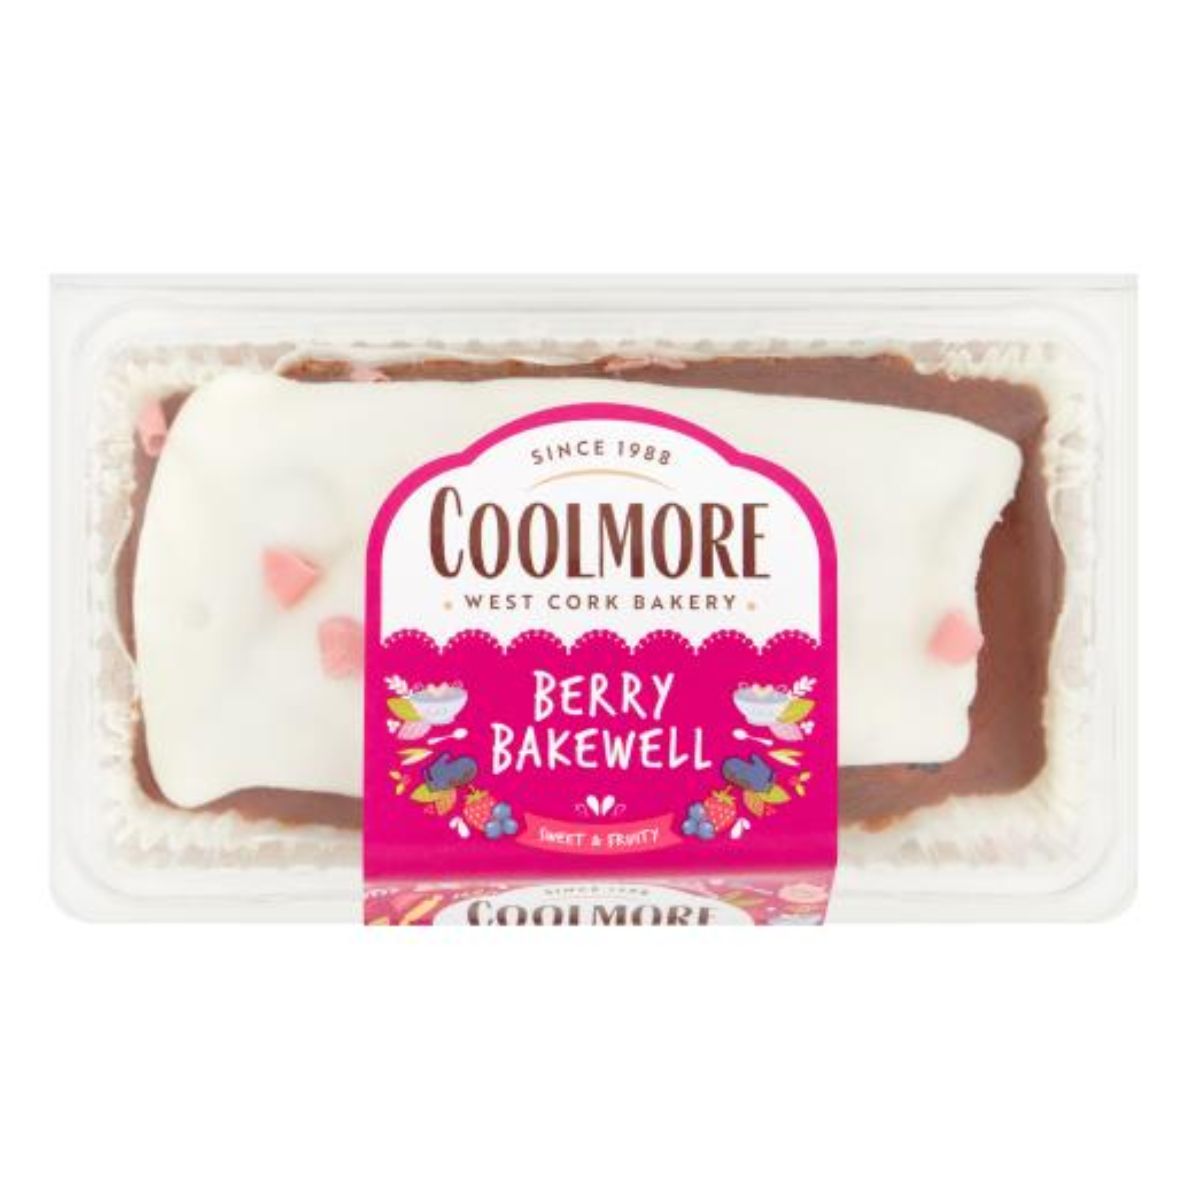 A box of Coolmore - West Cork Bakery Berry Bakewell - 400g.